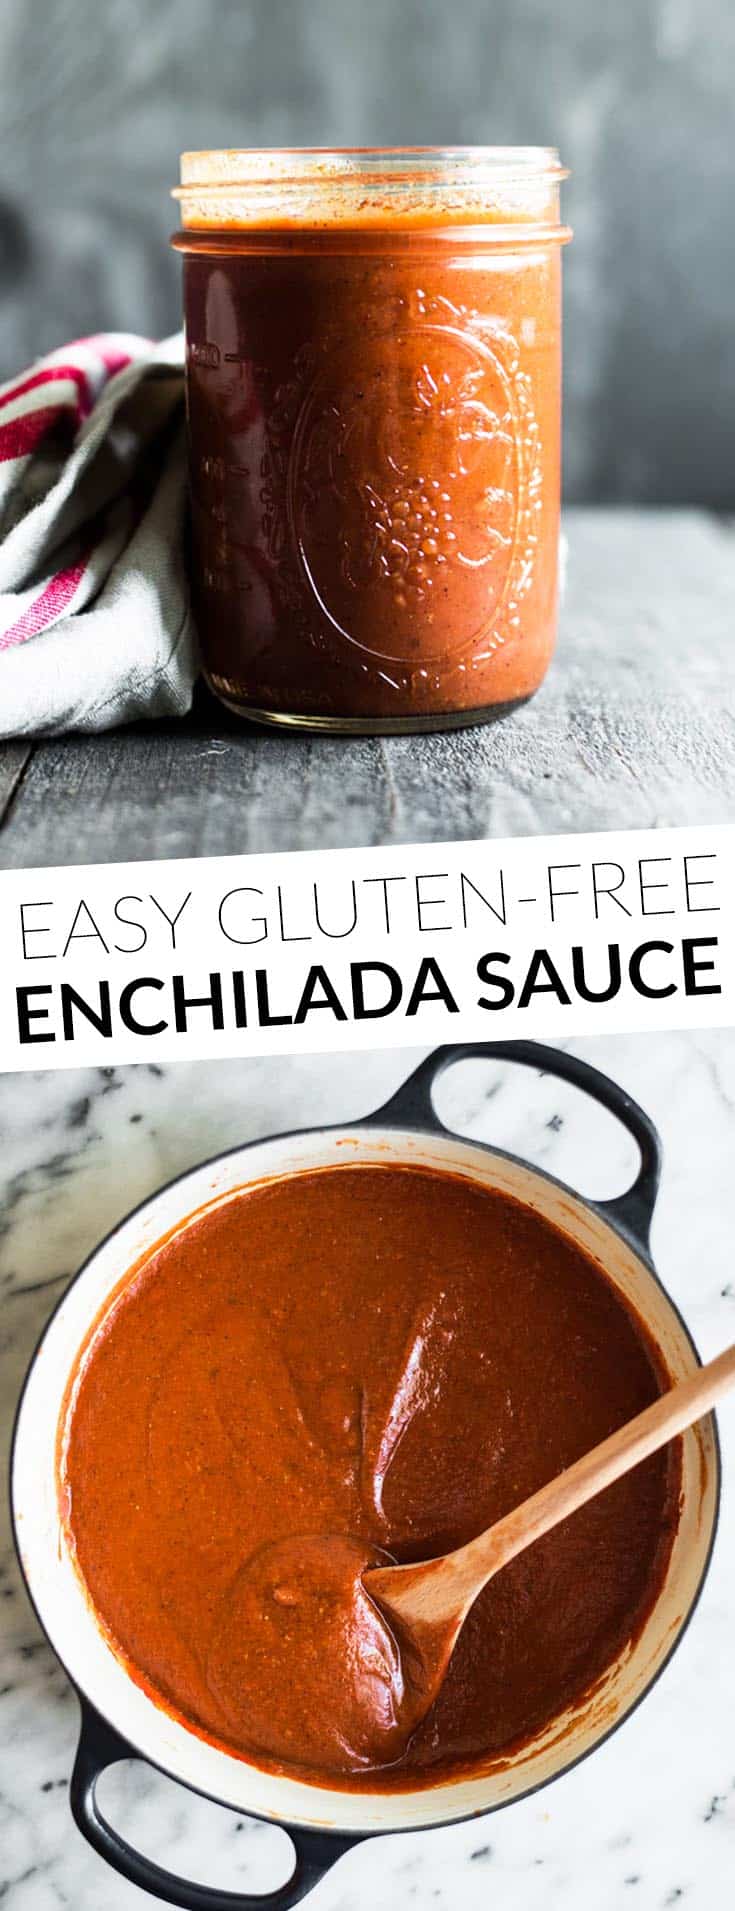 Quick Enchilada Sauce - Out of this world tasty, gluten-free enchilada sauce! Ready in 15 minutes! @healthynibs